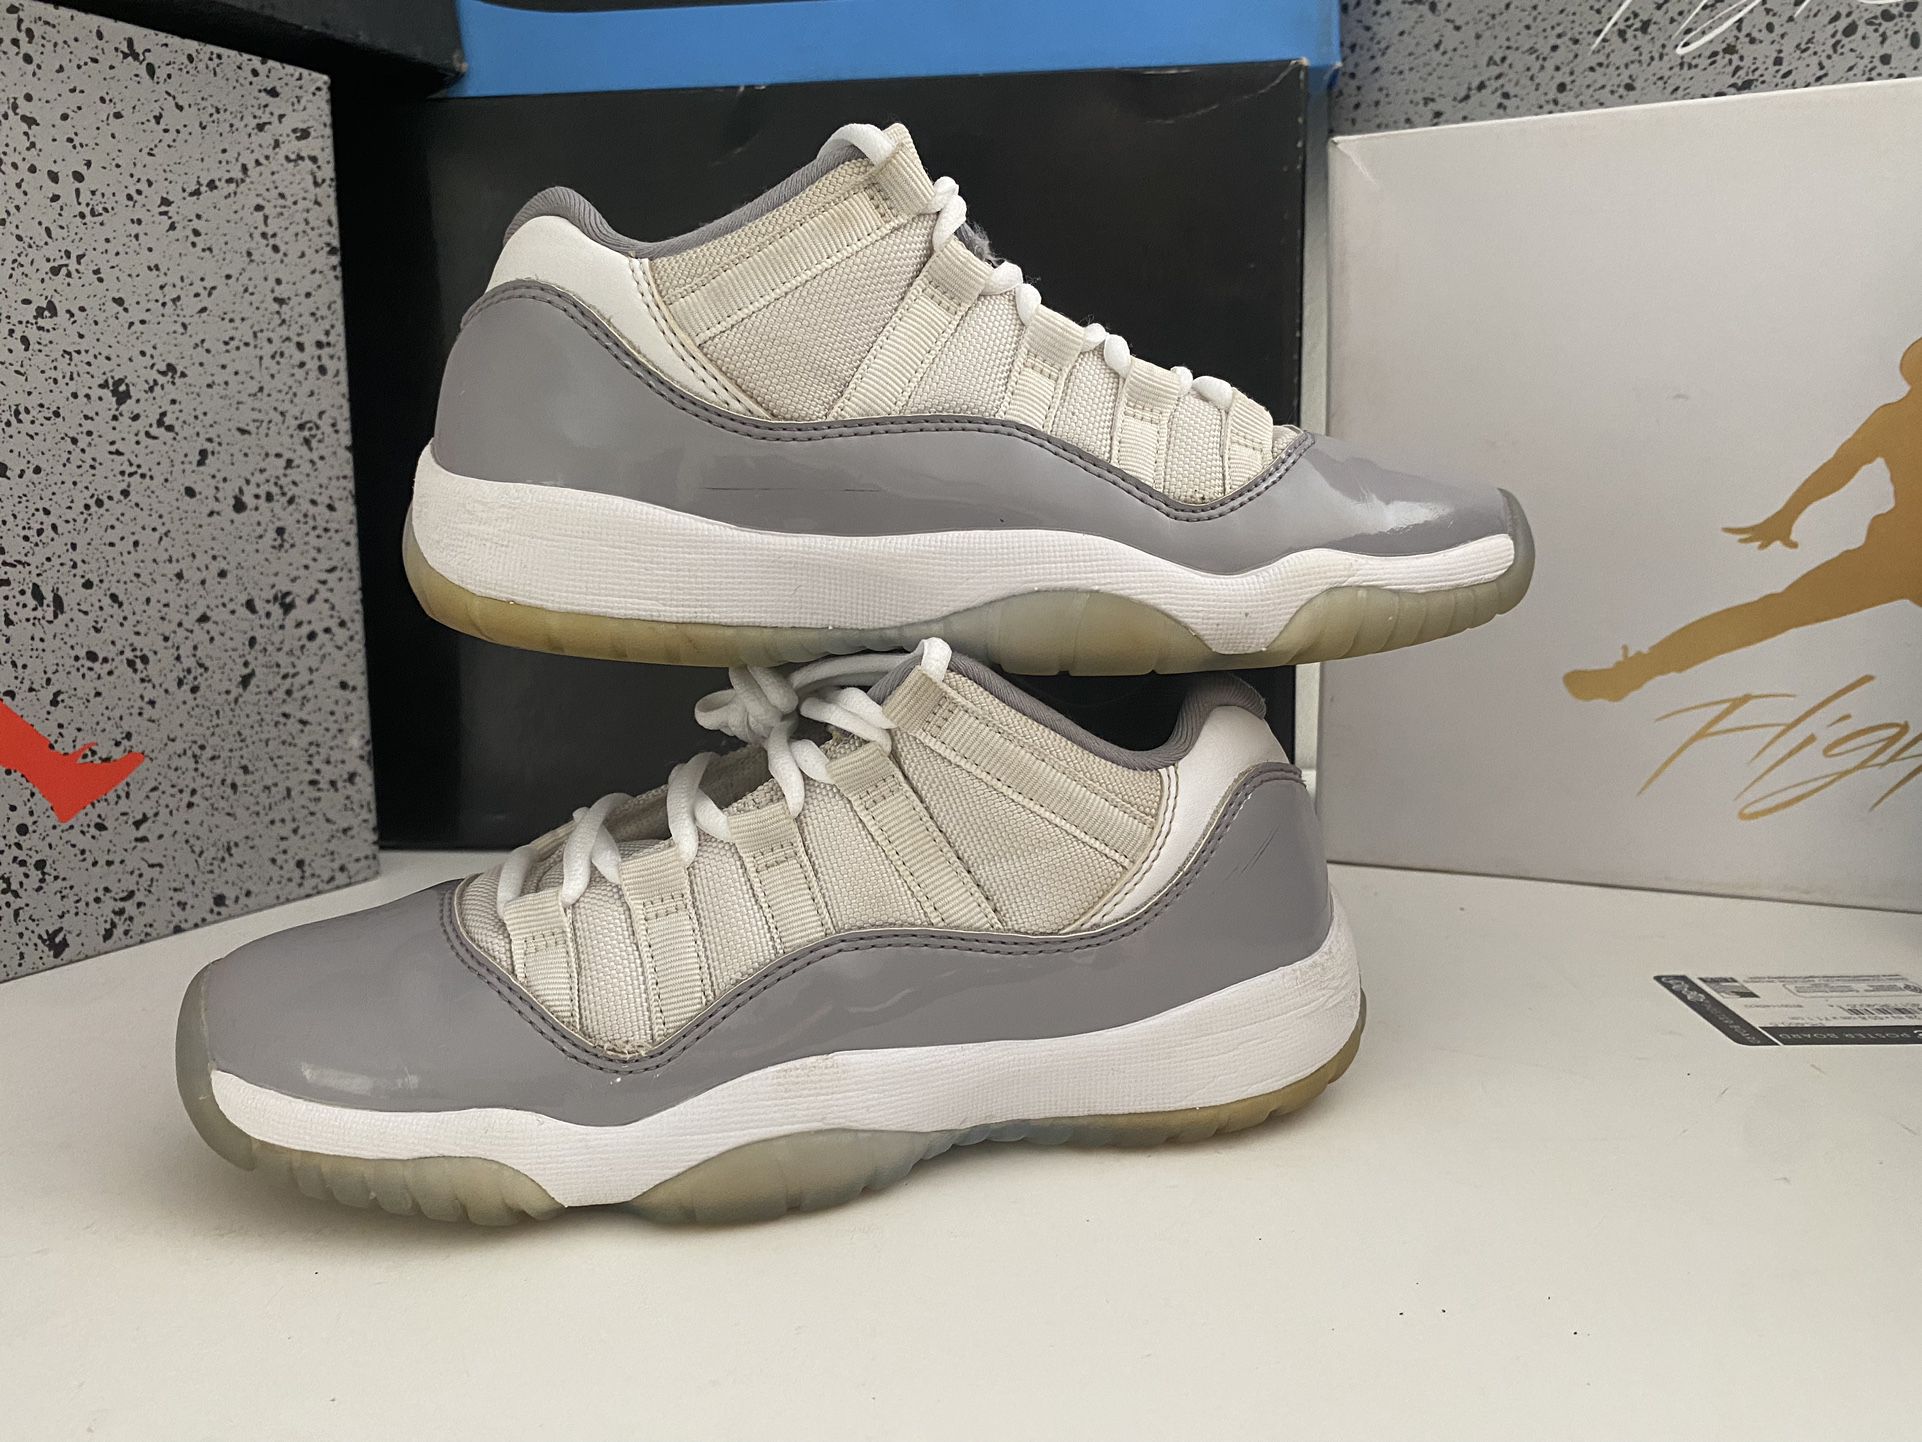 Air jordan 11 low Cement Grey size 5y ( pick up only)